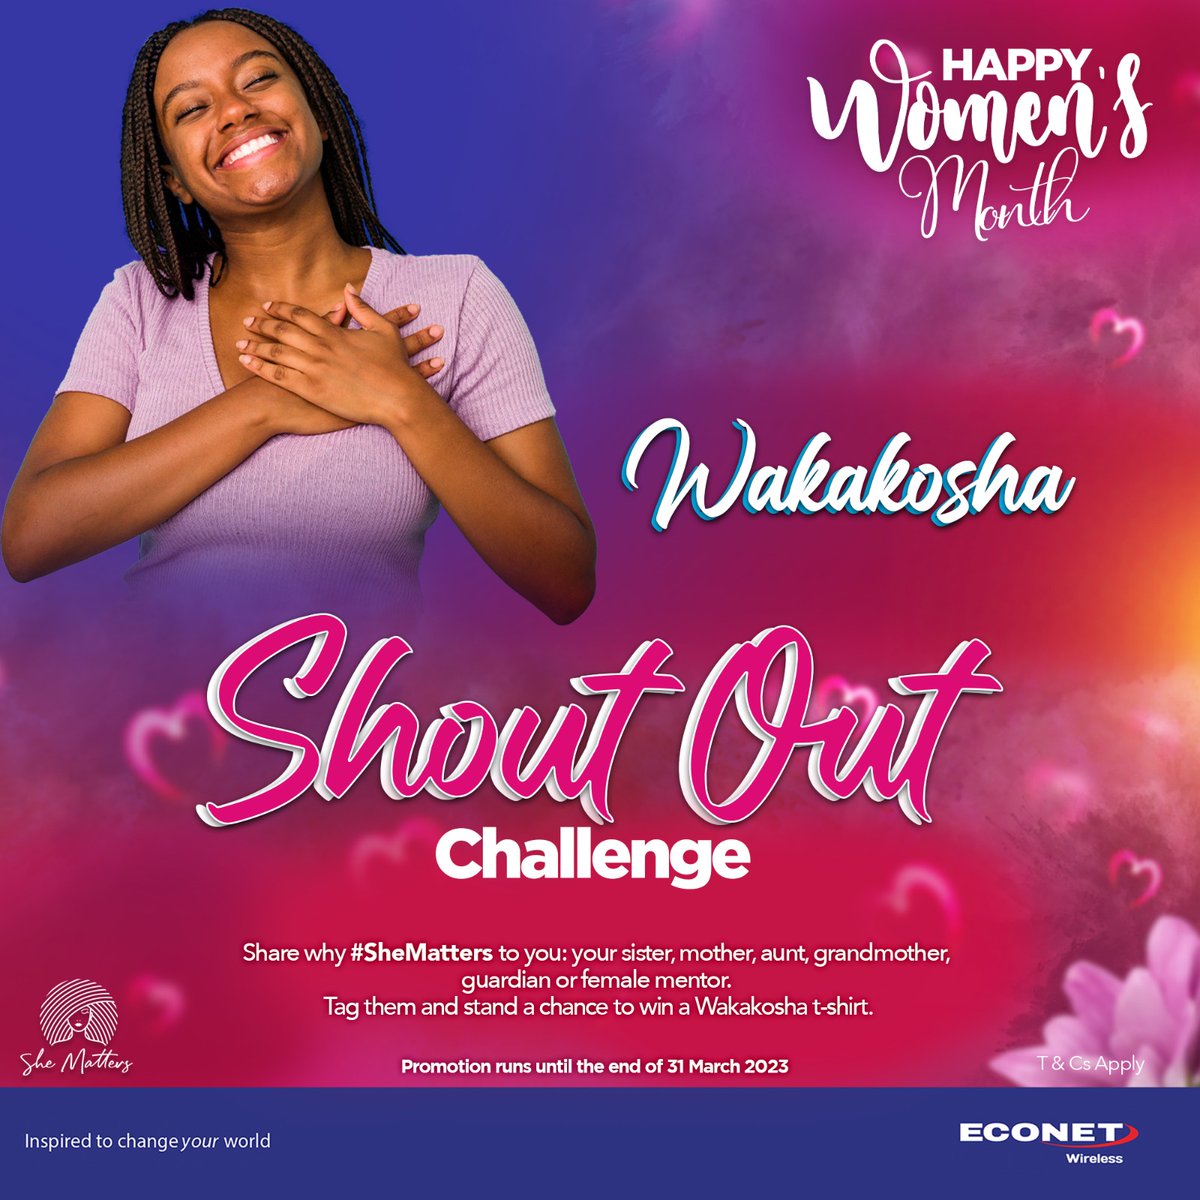 To celebrate Women's Month, shout out to a special woman in your life and share why #SheMatters.

Comment and tag @econetzimbabwe, use the hashtag #Wakakosha and stand a chance to win a fabulous Wakakosha T-Shirt.

Happy Women's Month Buddies. Let's go 😊